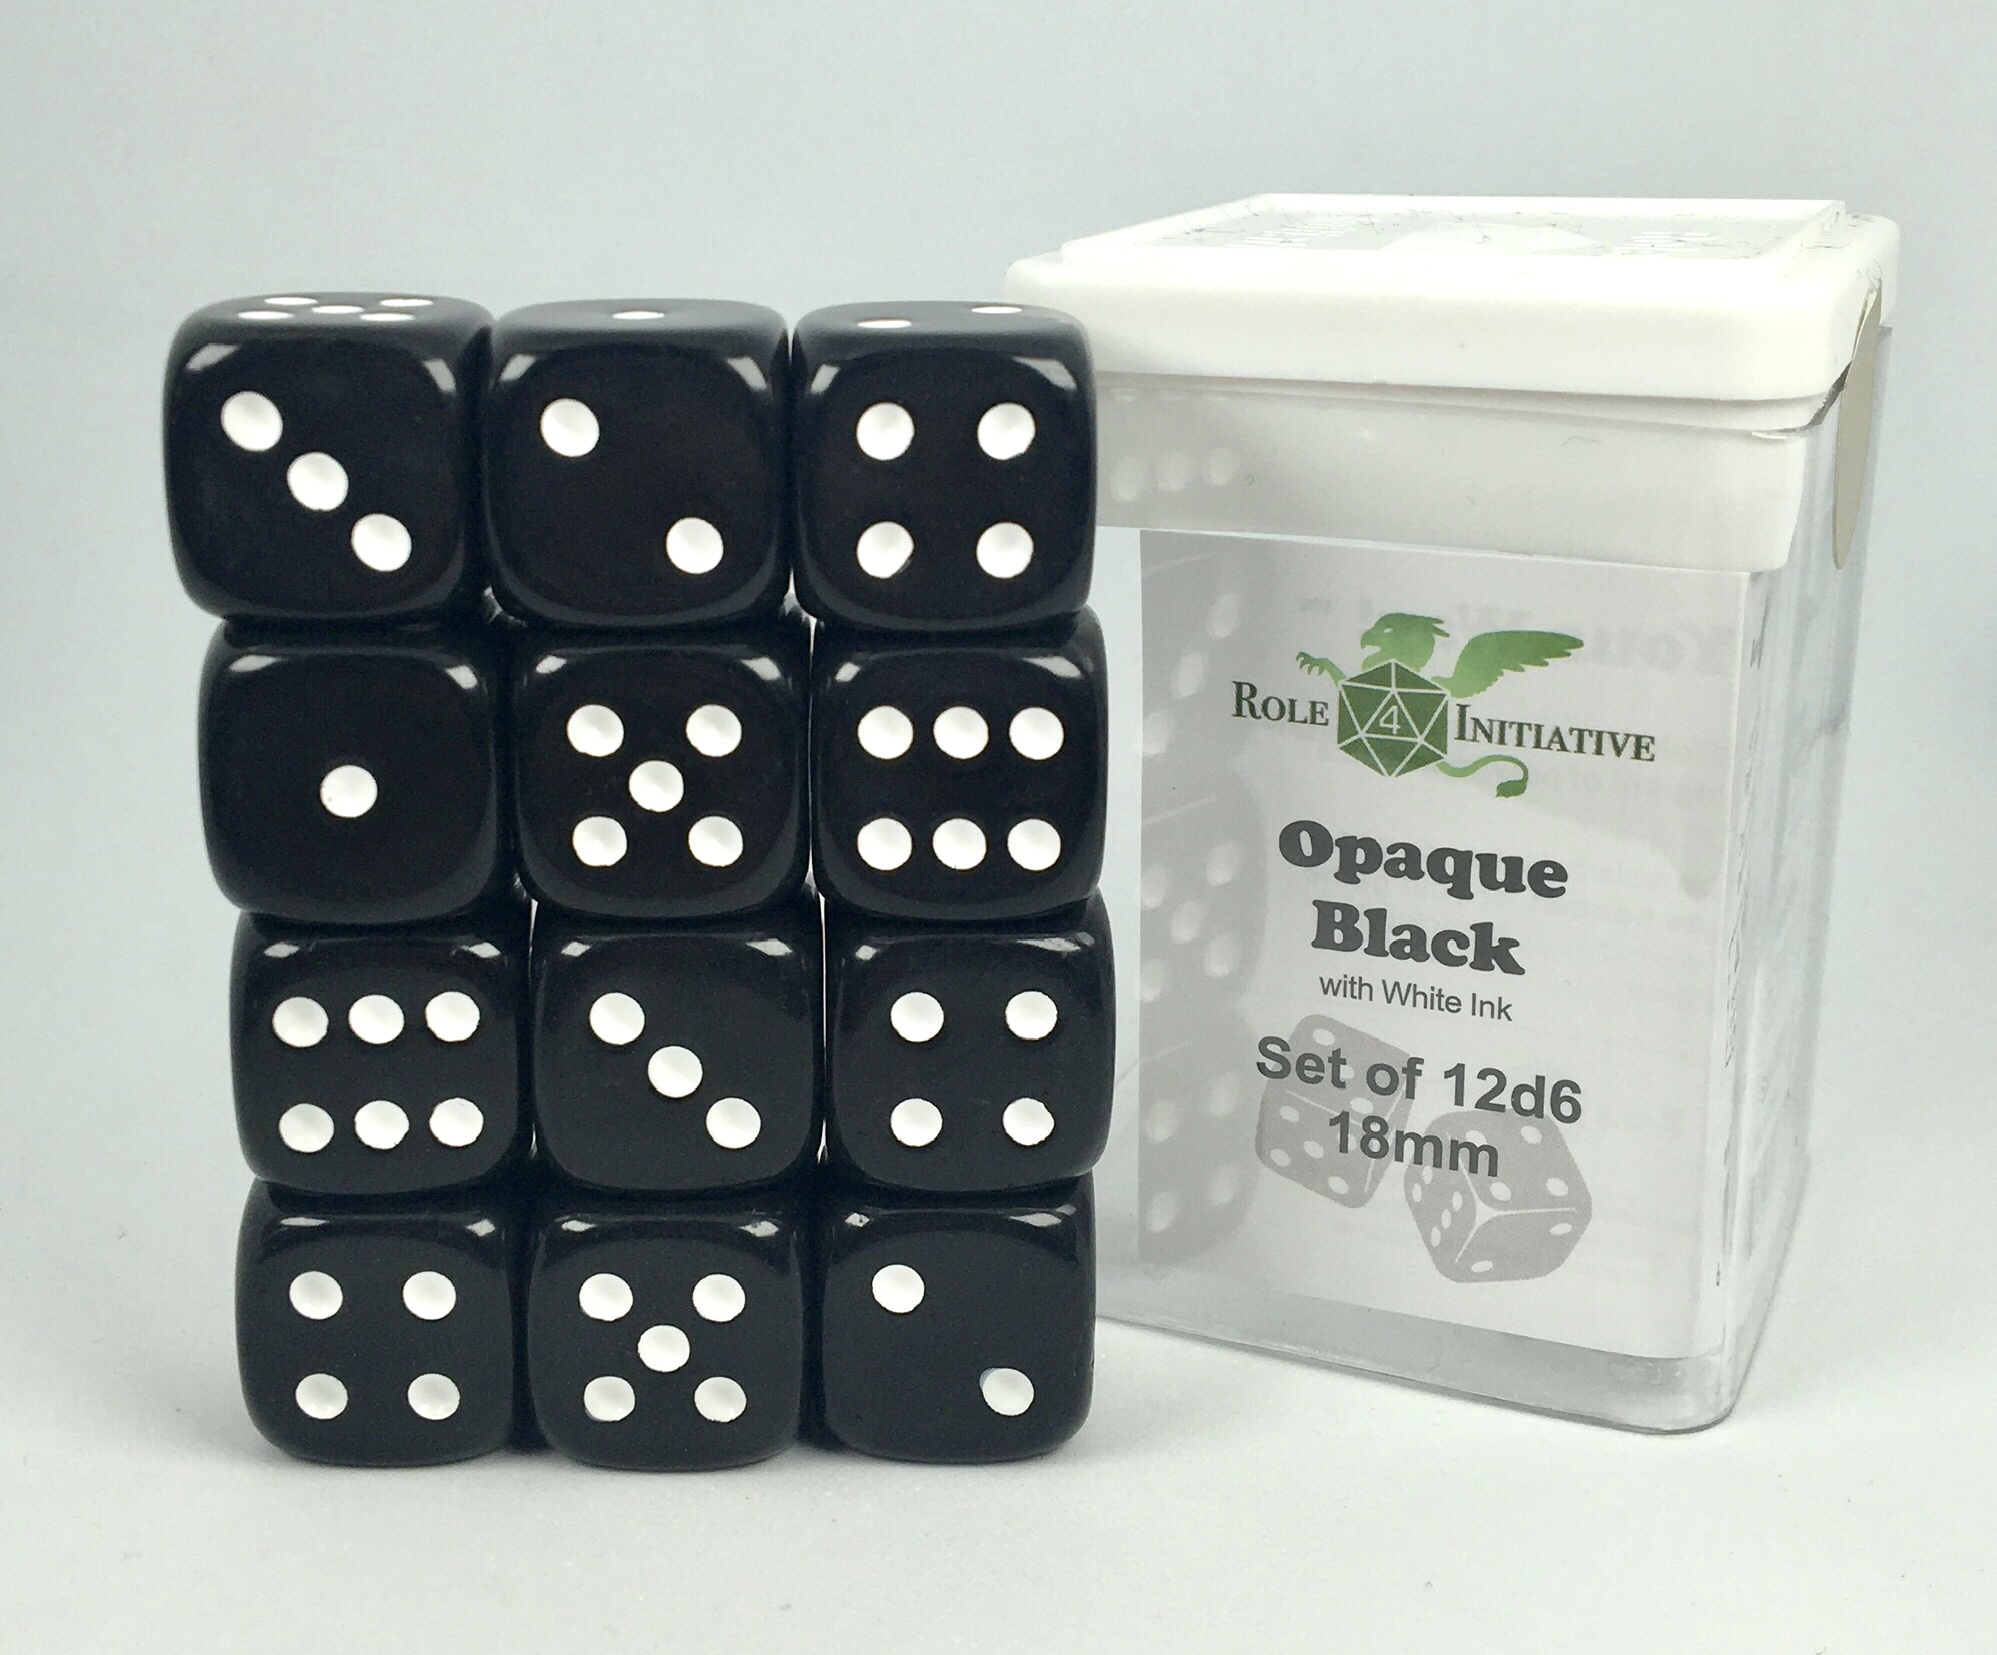 Role 4 Initiative: Dice Set: 12d6: Opaque Black and White (18mm) 